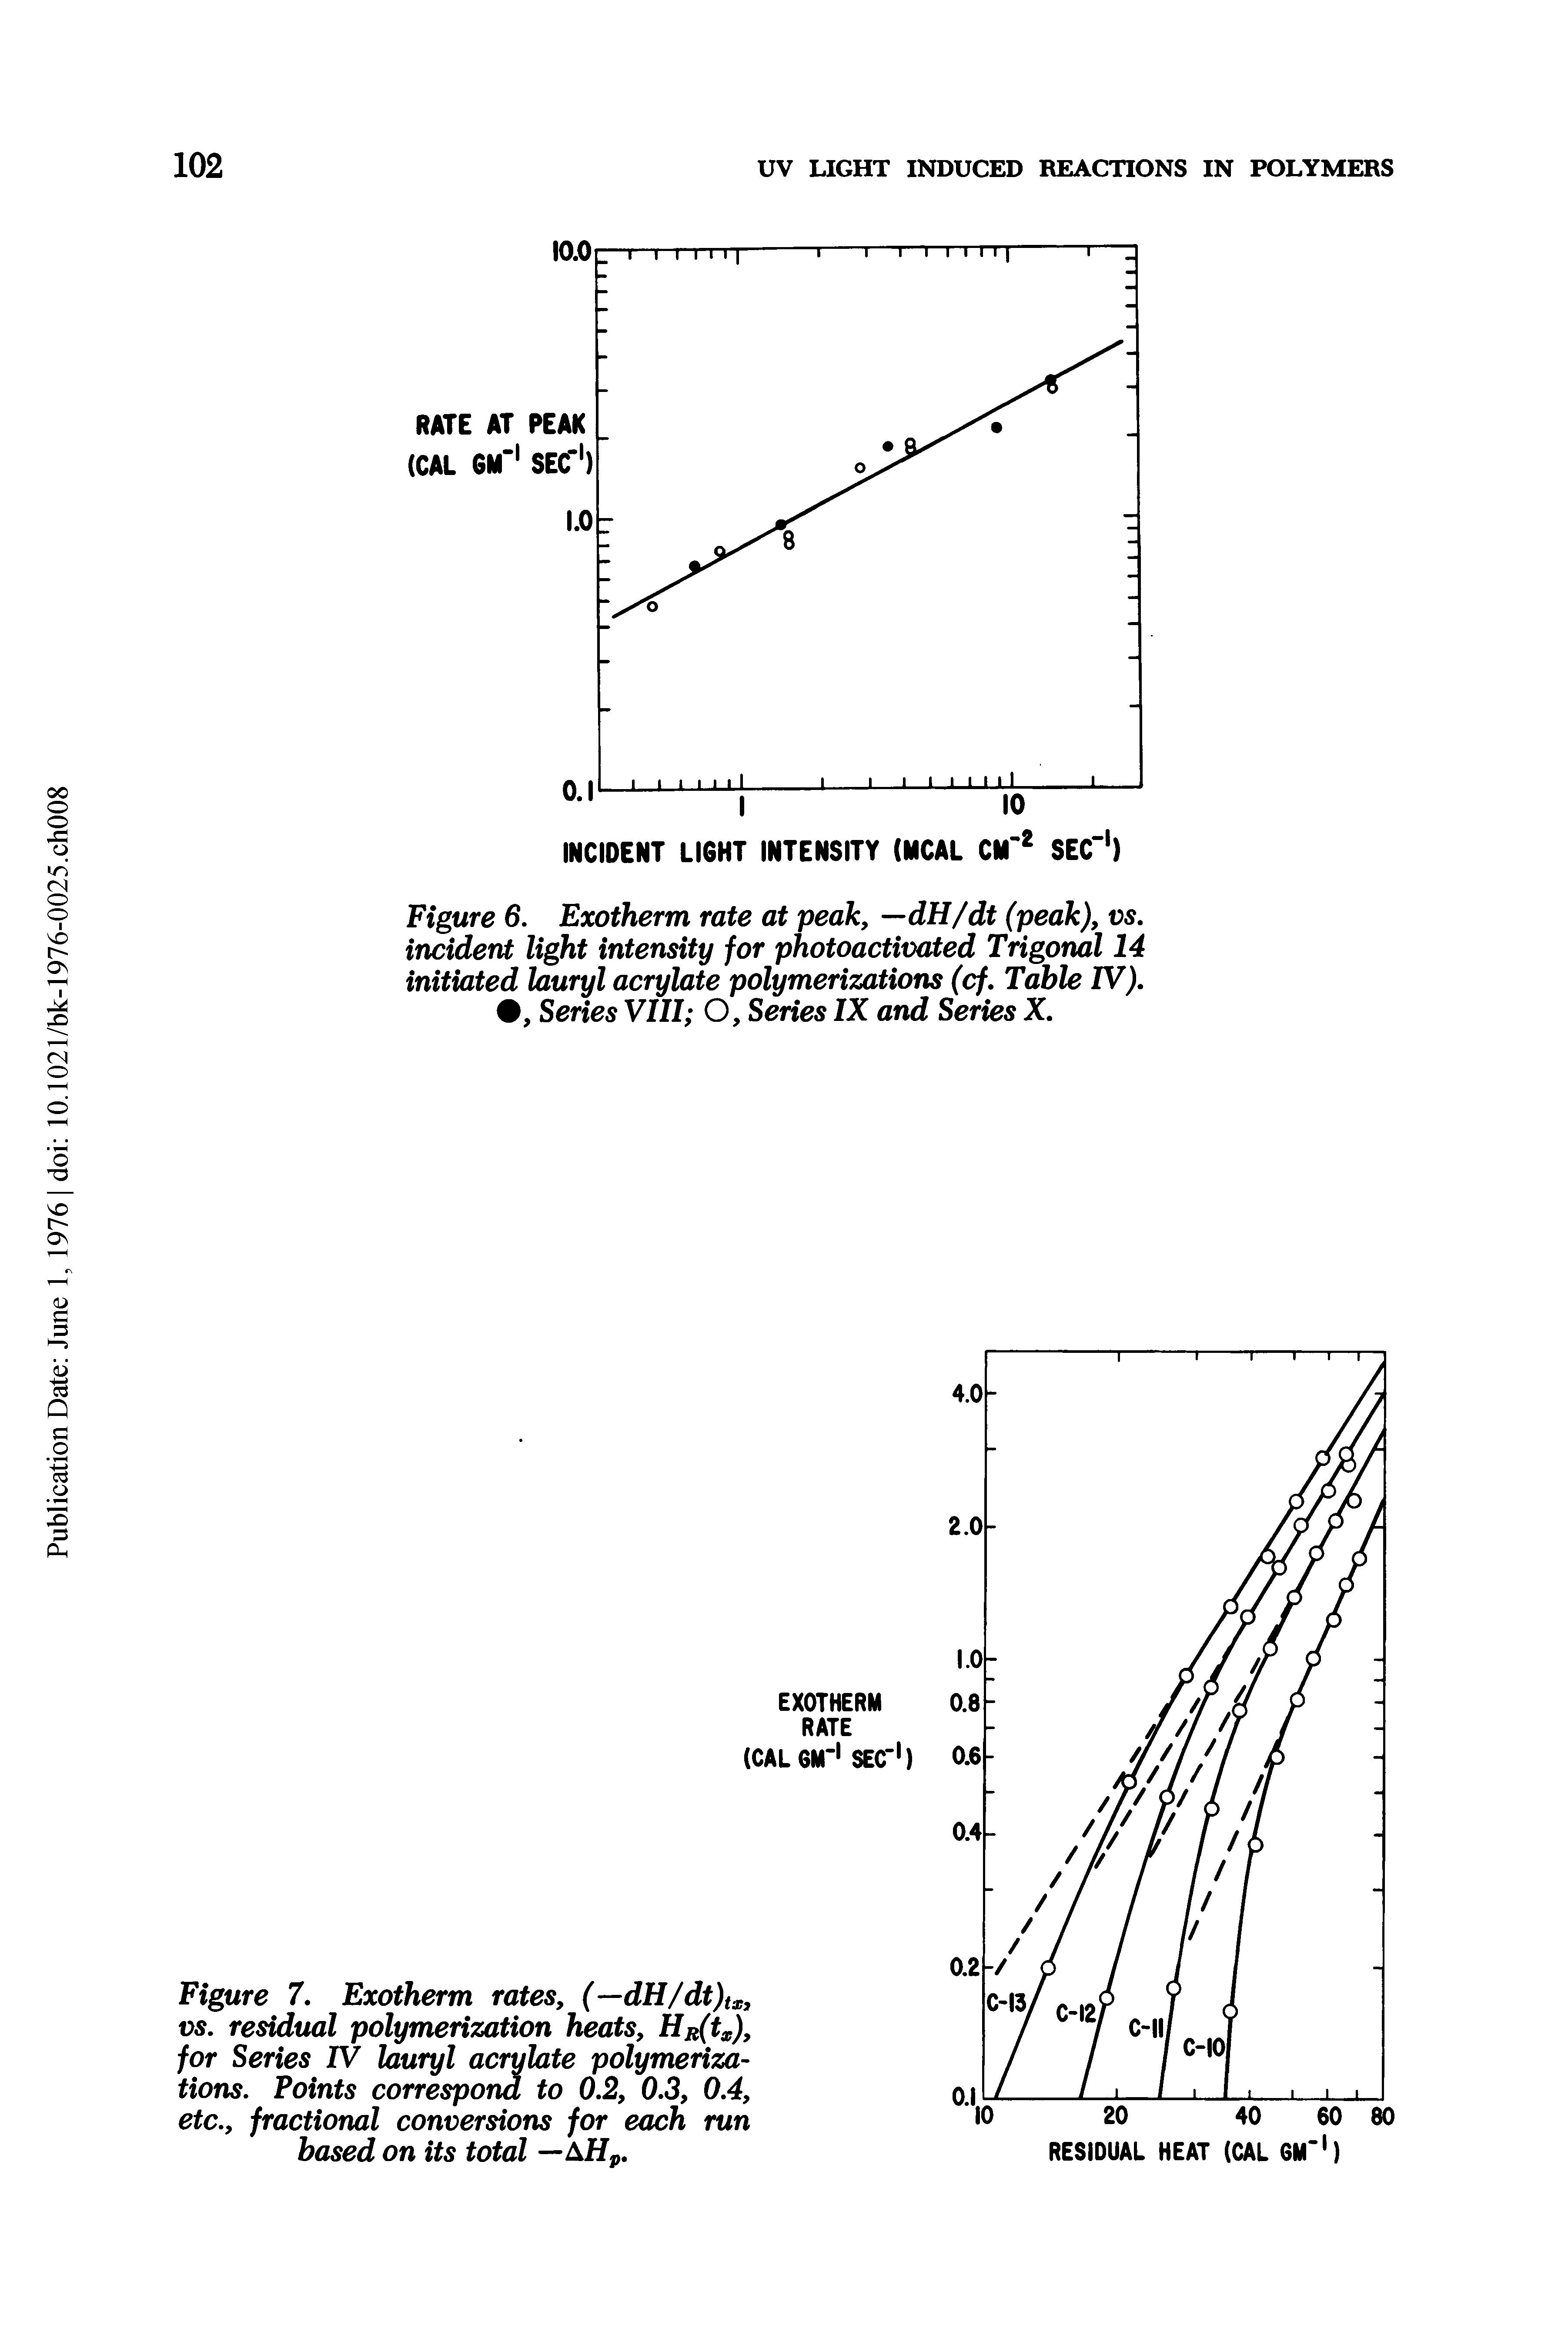 Figure 6. Exotherm rate at peak, —dH/dt (peak), vs. incident light intensity for photoactivated Trigonal 14 initiated lauryl acrylate polymerizations (cf. Table TV). 0, Series VIII O, Series IX and Series X.